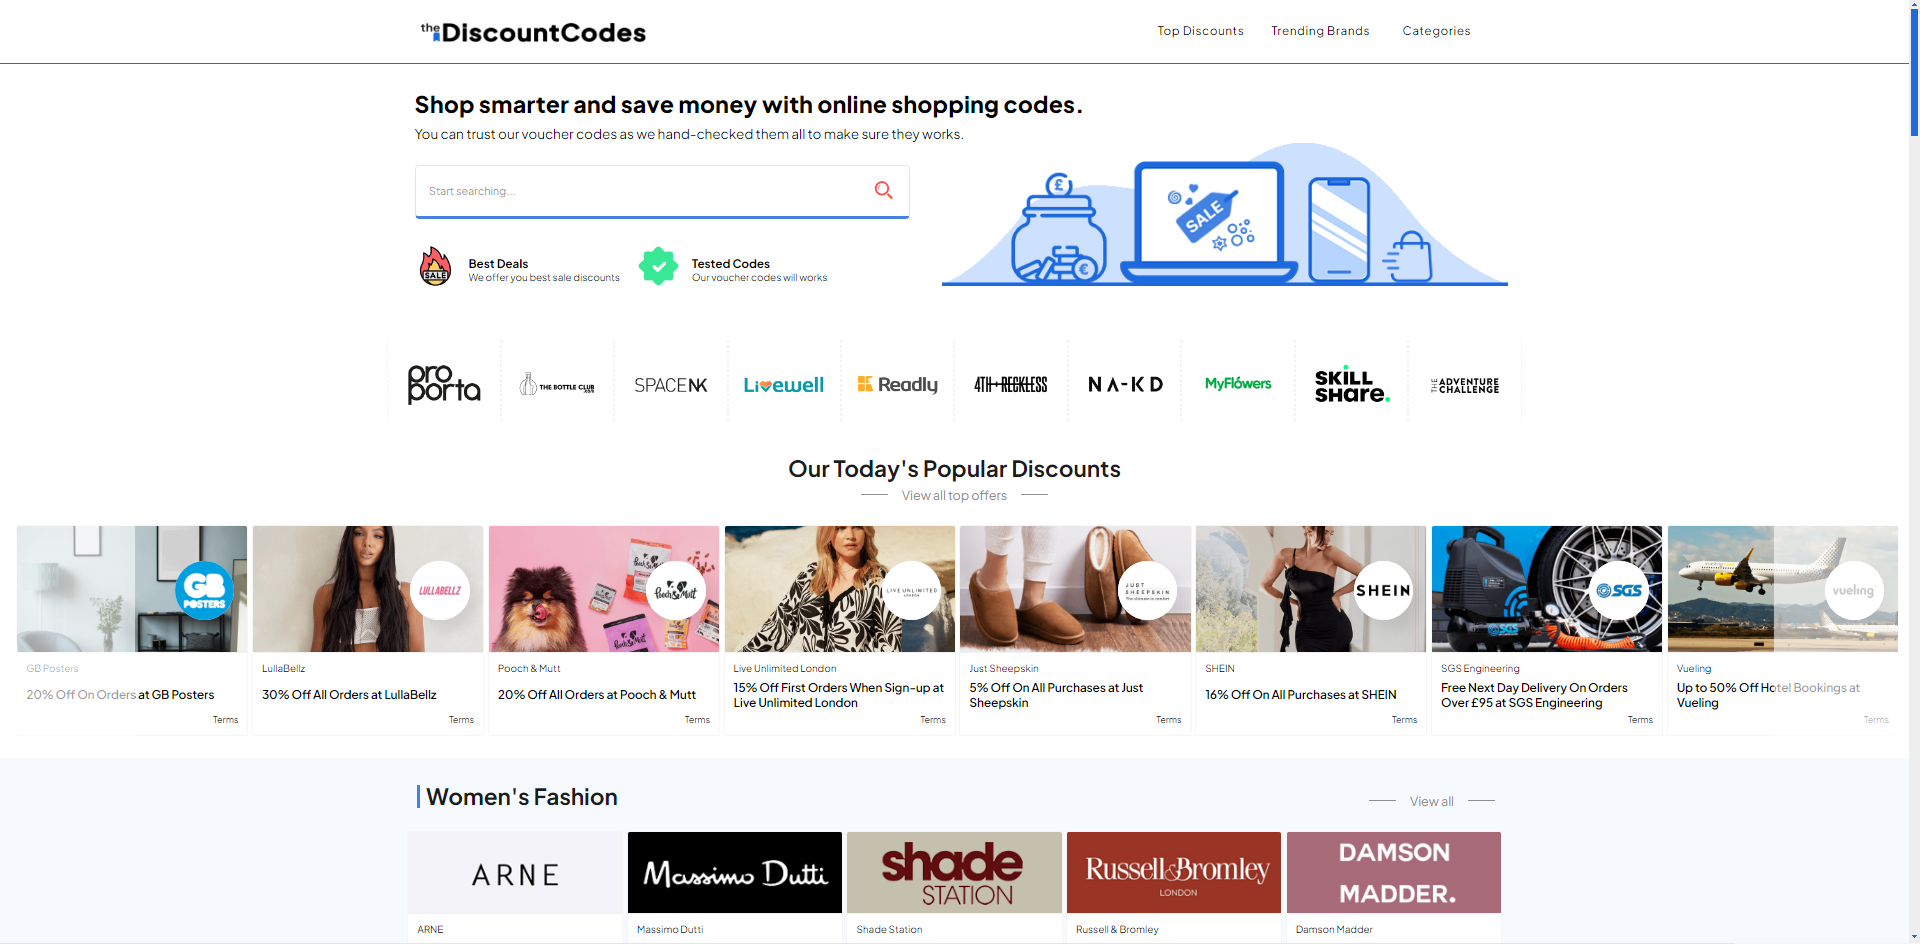 theDiscountCodes homepage